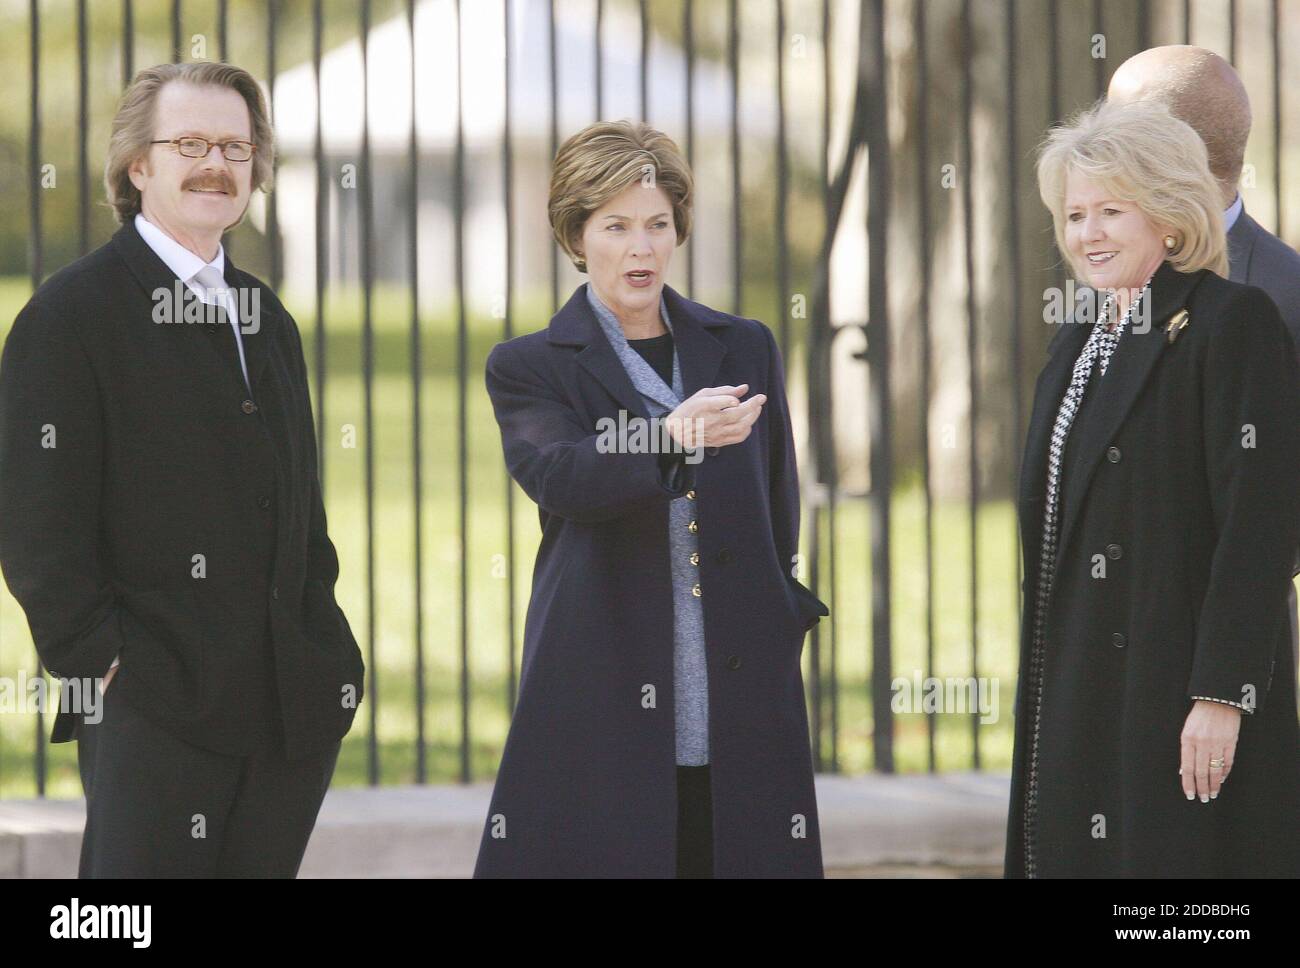 NO FILM, NO VIDEO, NO TV, NO DOCUMENTARY - Mrs. Laura Bush is joined by landscape designer Michael Van Valkenburgh, left, and Mary Peters, Administrator of the Federal Highway Commission, right, in front of the White House during a ceremony to re-open Pennsylvania Avenue to pedestrian traffic, on November 9, 2004, in Washington, D.C. Photo by Chuck Kennedy/US News Story Slugged/KRT/ABACA. Stock Photo